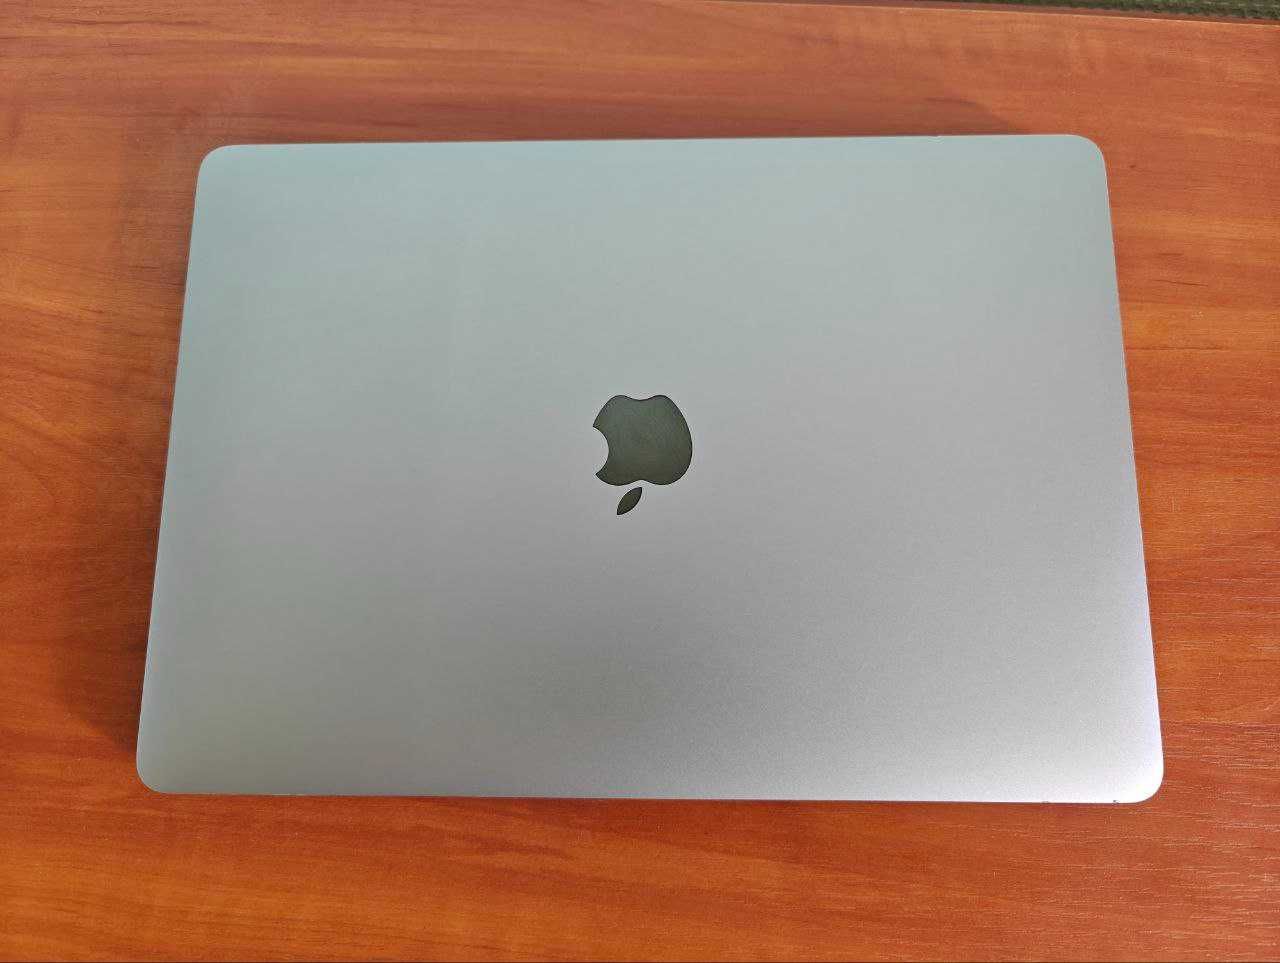 Apple MacBook Pro 13 2018 (A1989) with Touchbar. Space Gray